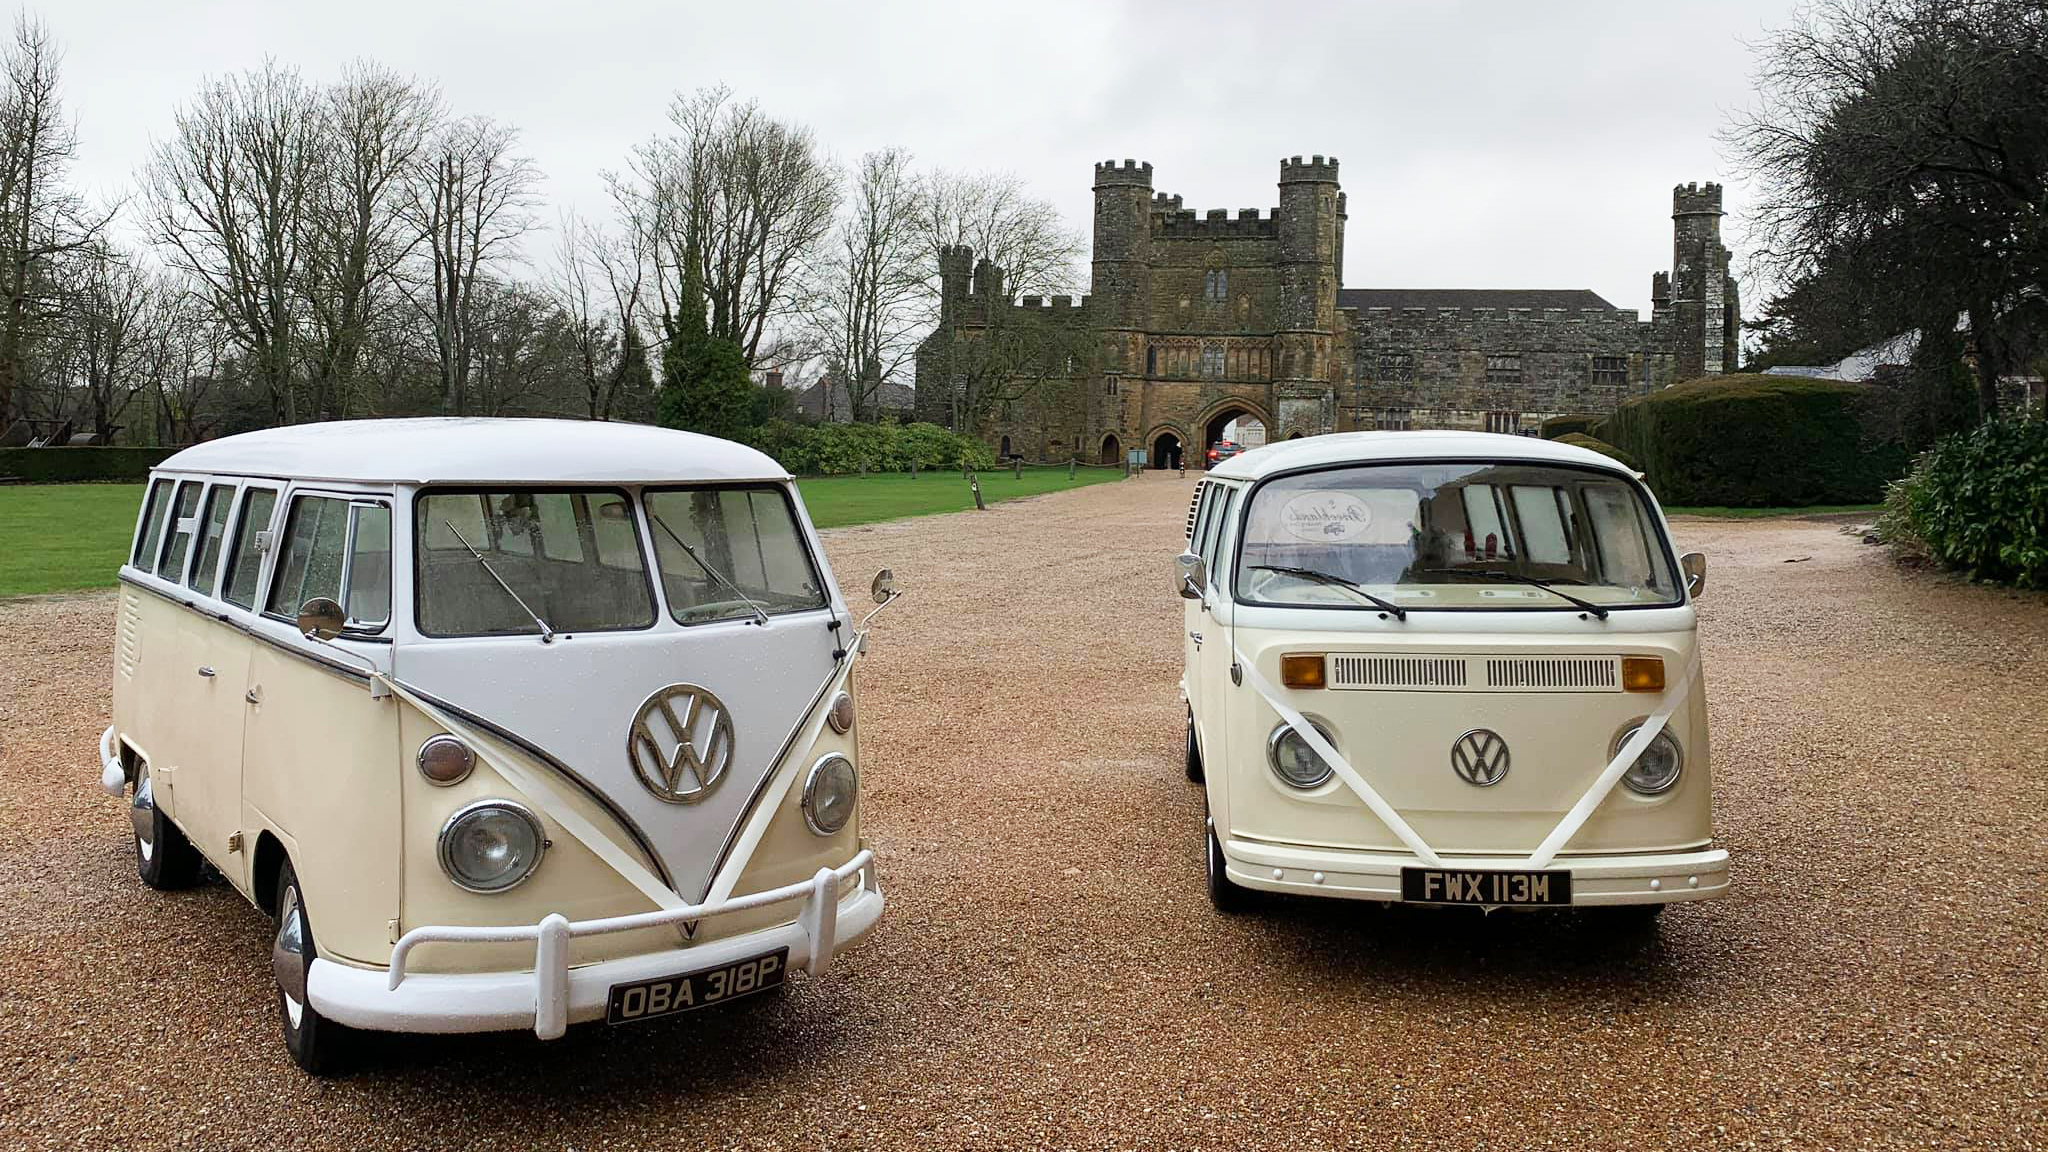 Two Volkswagen Campervan in White over Cream decorated with a matching paif of white ribbons. The campervan on the left is the Spolitscreen version and right Campervan in the Bay window.